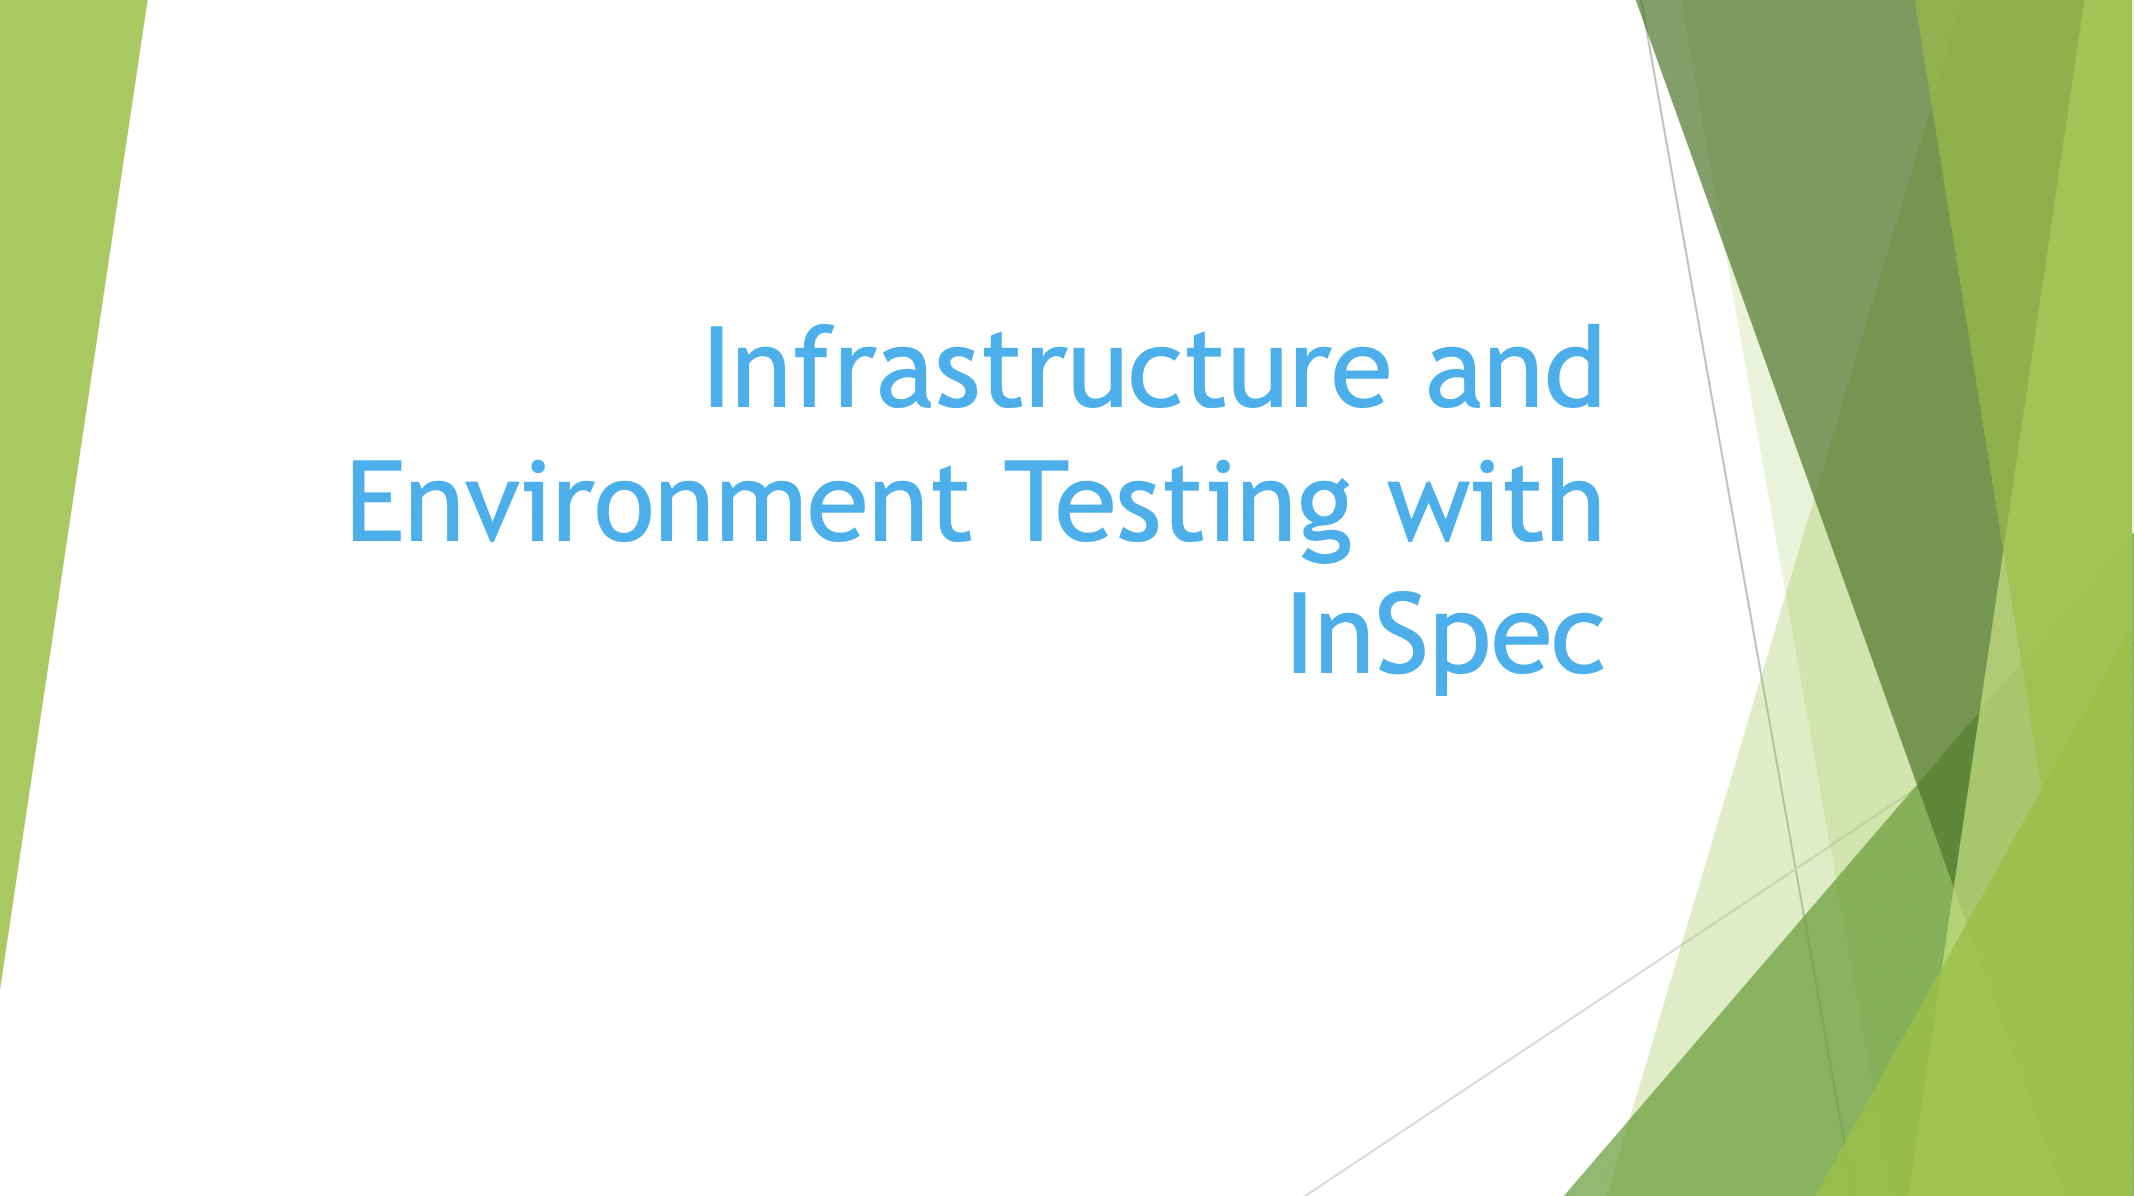 Infrastructure and Environment Testing with InSpec